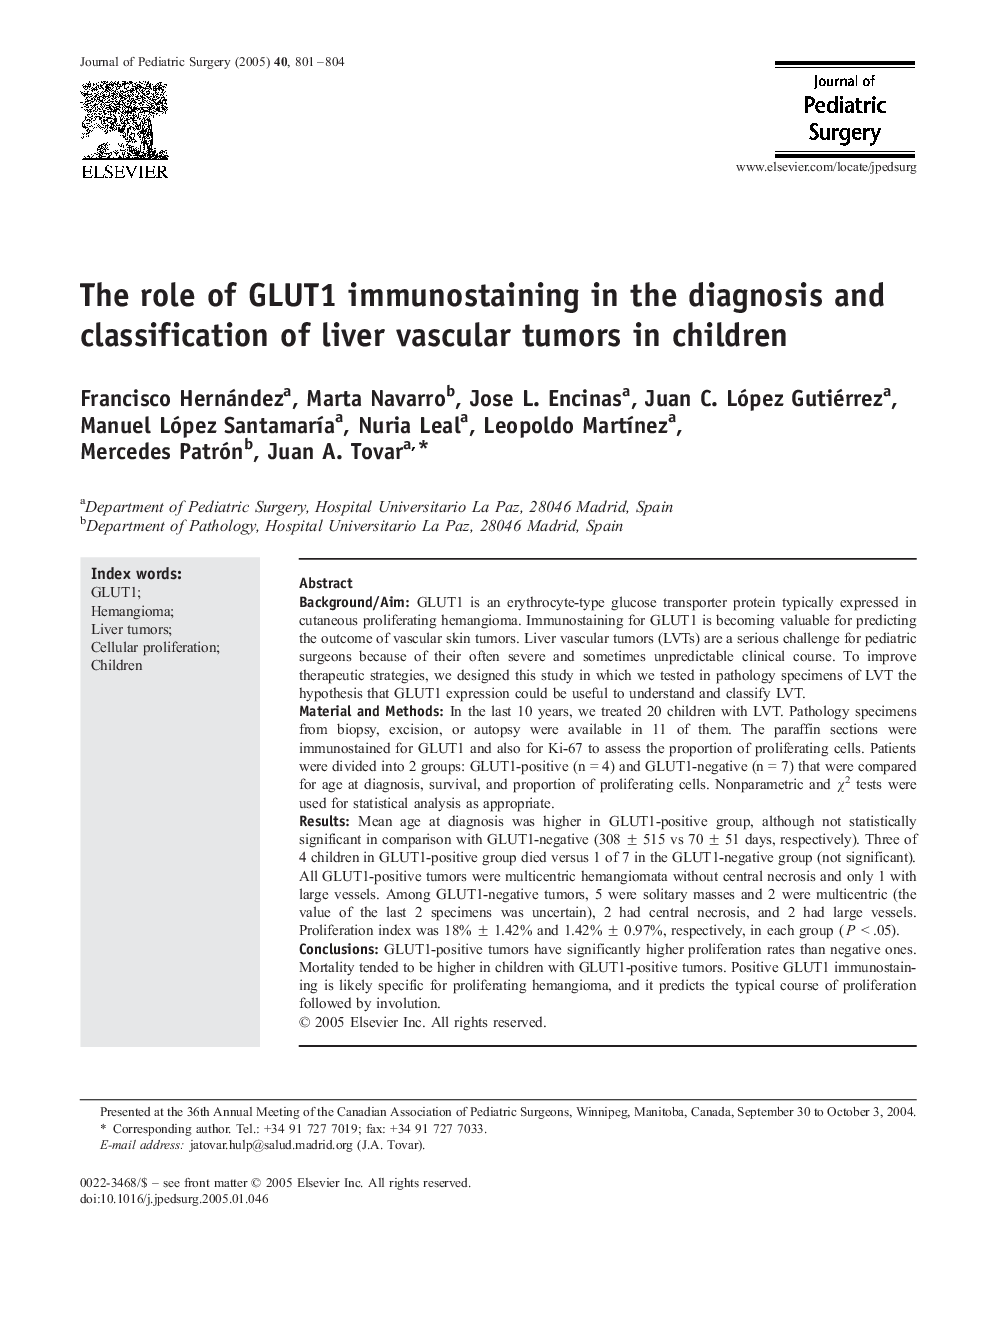 The role of GLUT1 immunostaining in the diagnosis and classification of liver vascular tumors in children